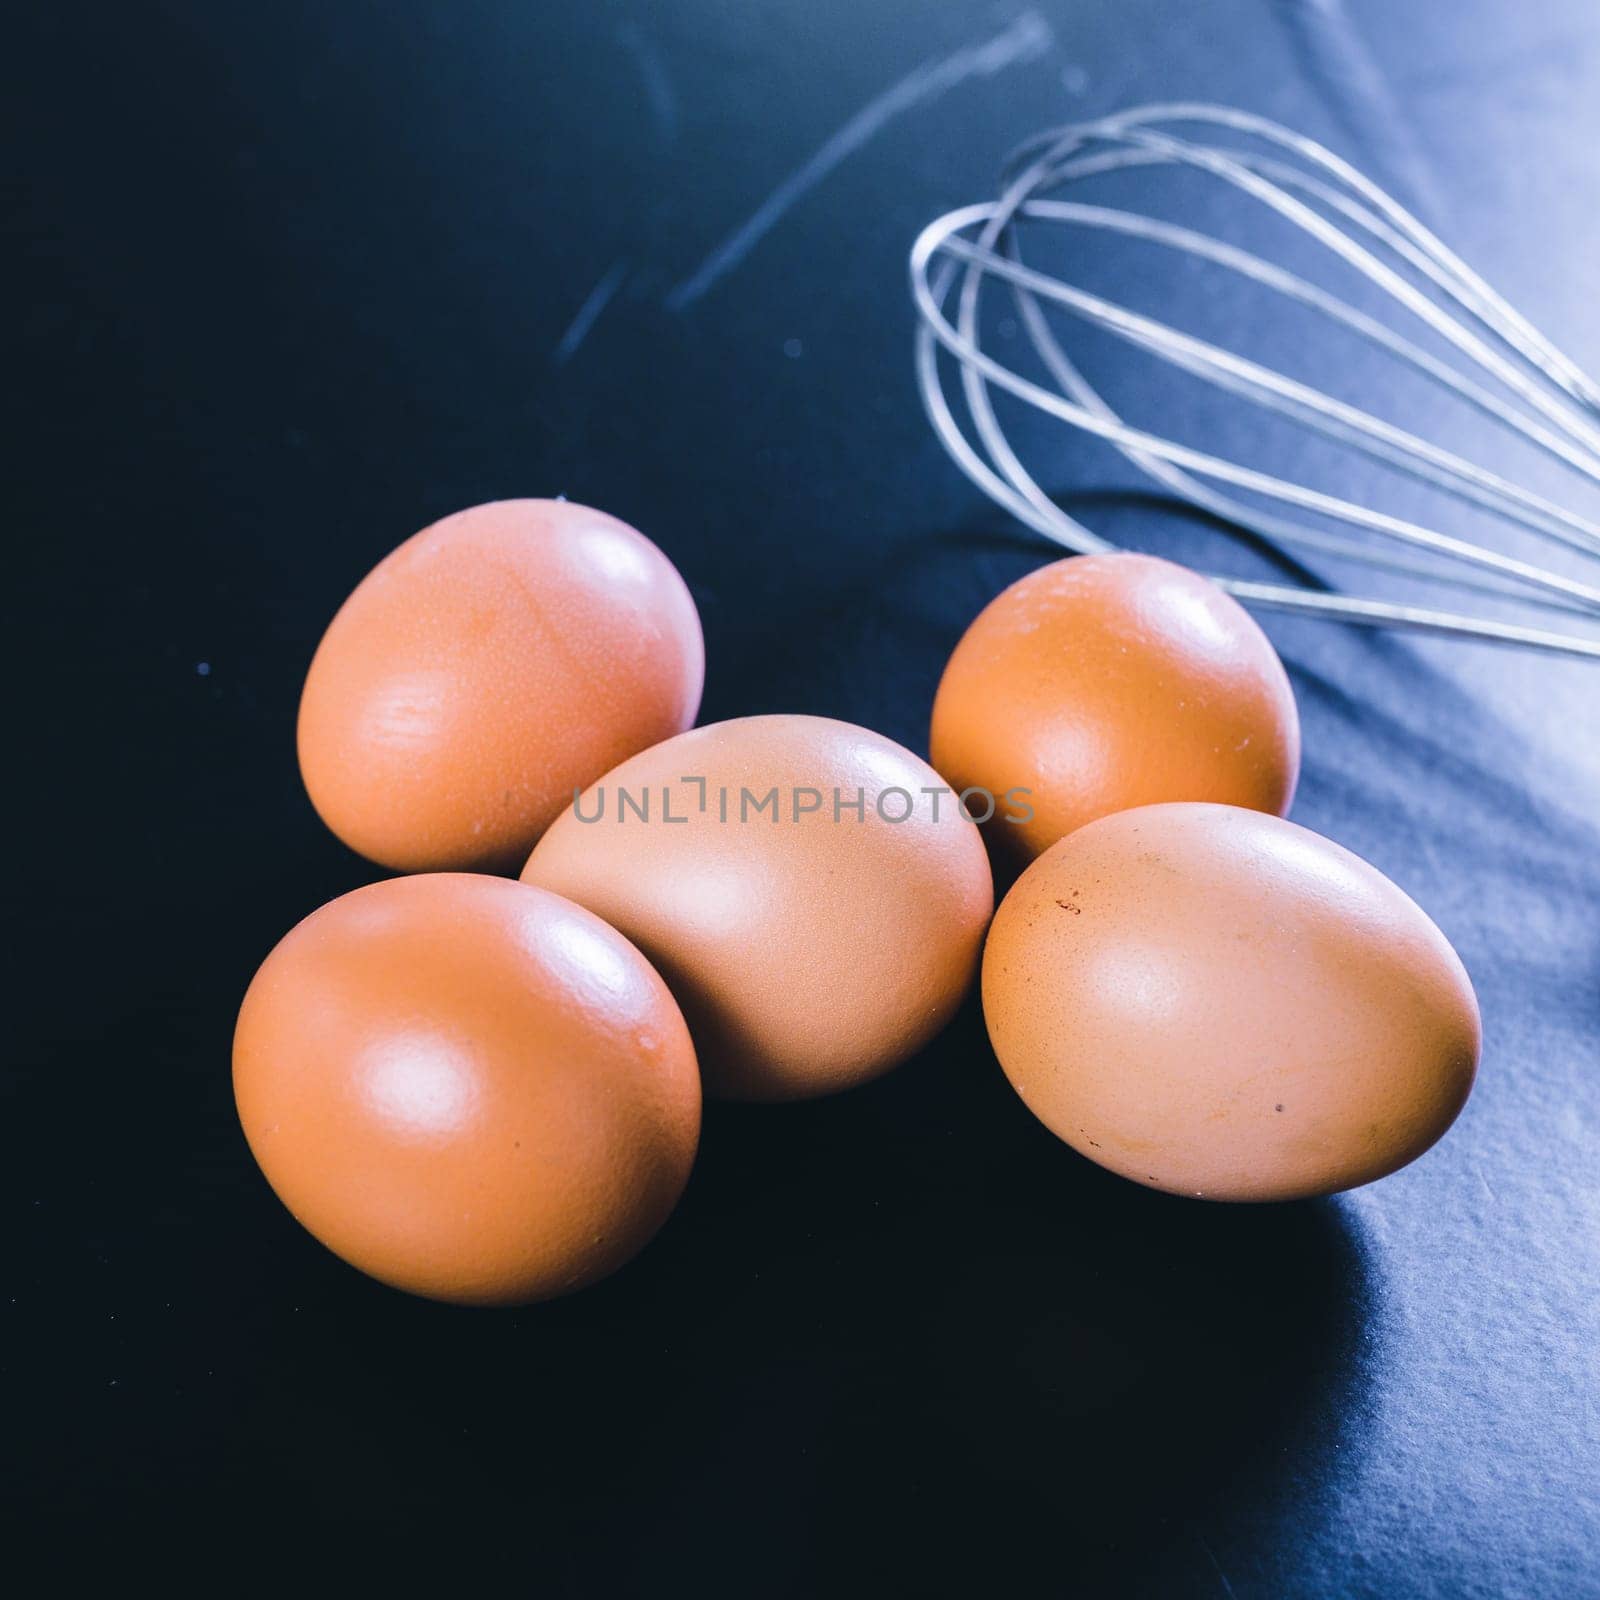 eggs and whisk on a black background by Fabrikasimf